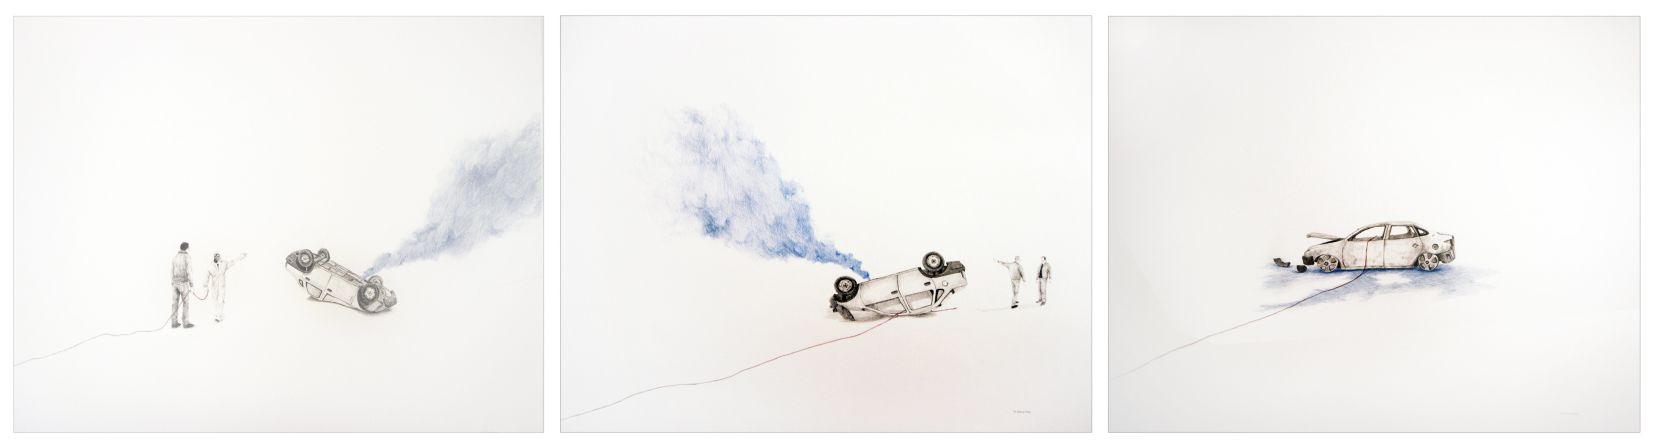 <em>Walk under a white sky (triptych), 2015 </em><br /><br />"The Algerian artist often looks to political and social action and events in the region to inspire his multilayered creations, which juxtapose drawing and animation."